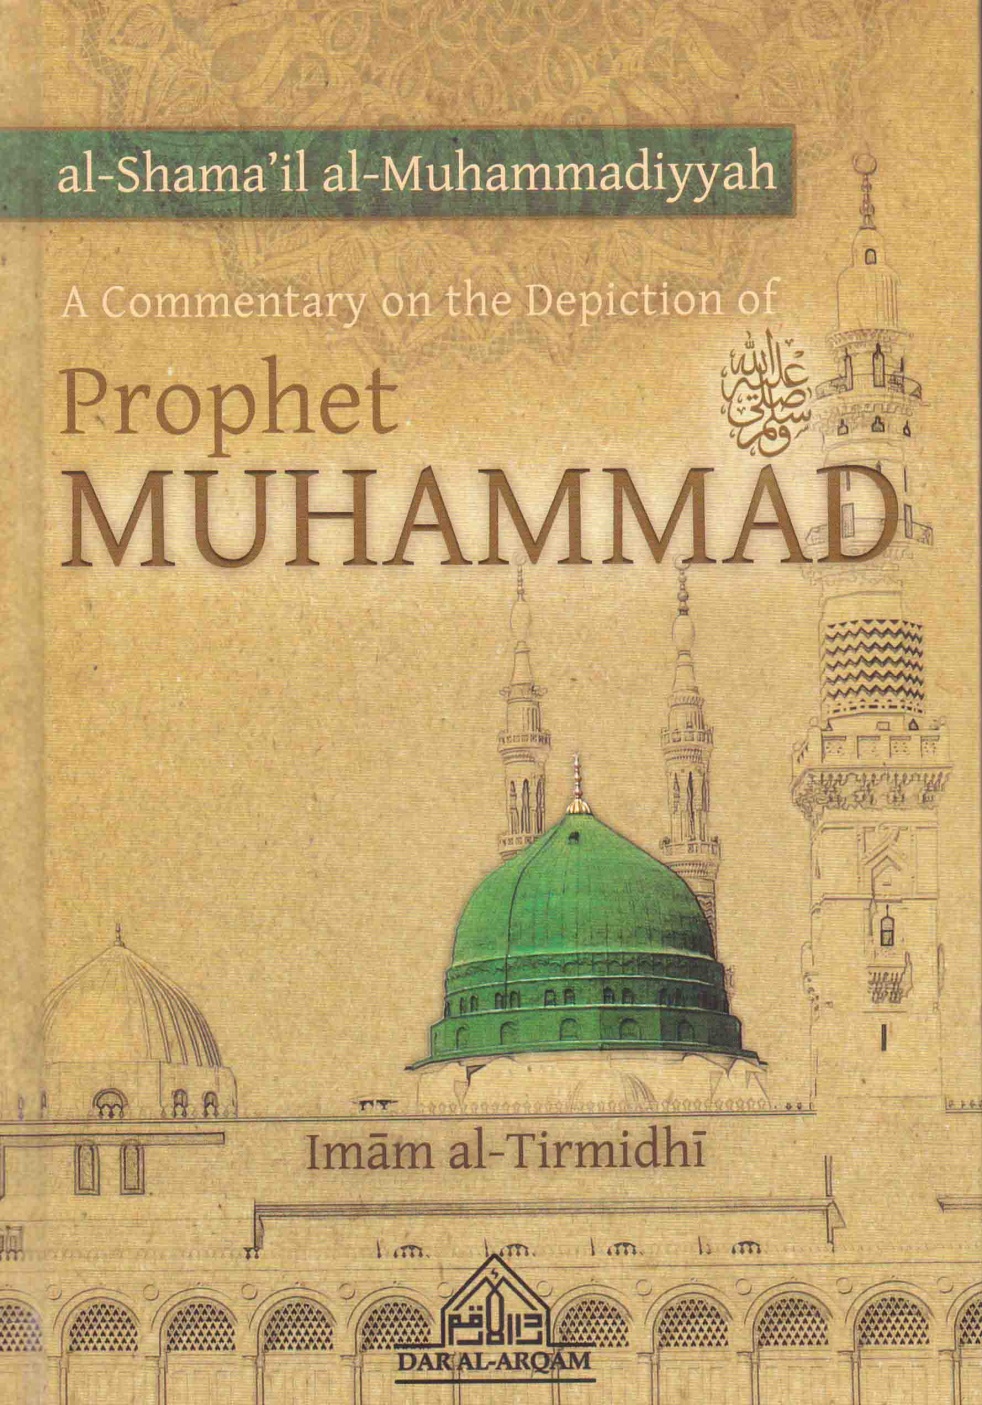 026 The Perfect Example | Chapter 47: The Humility of the Prophet | Walid Molhem